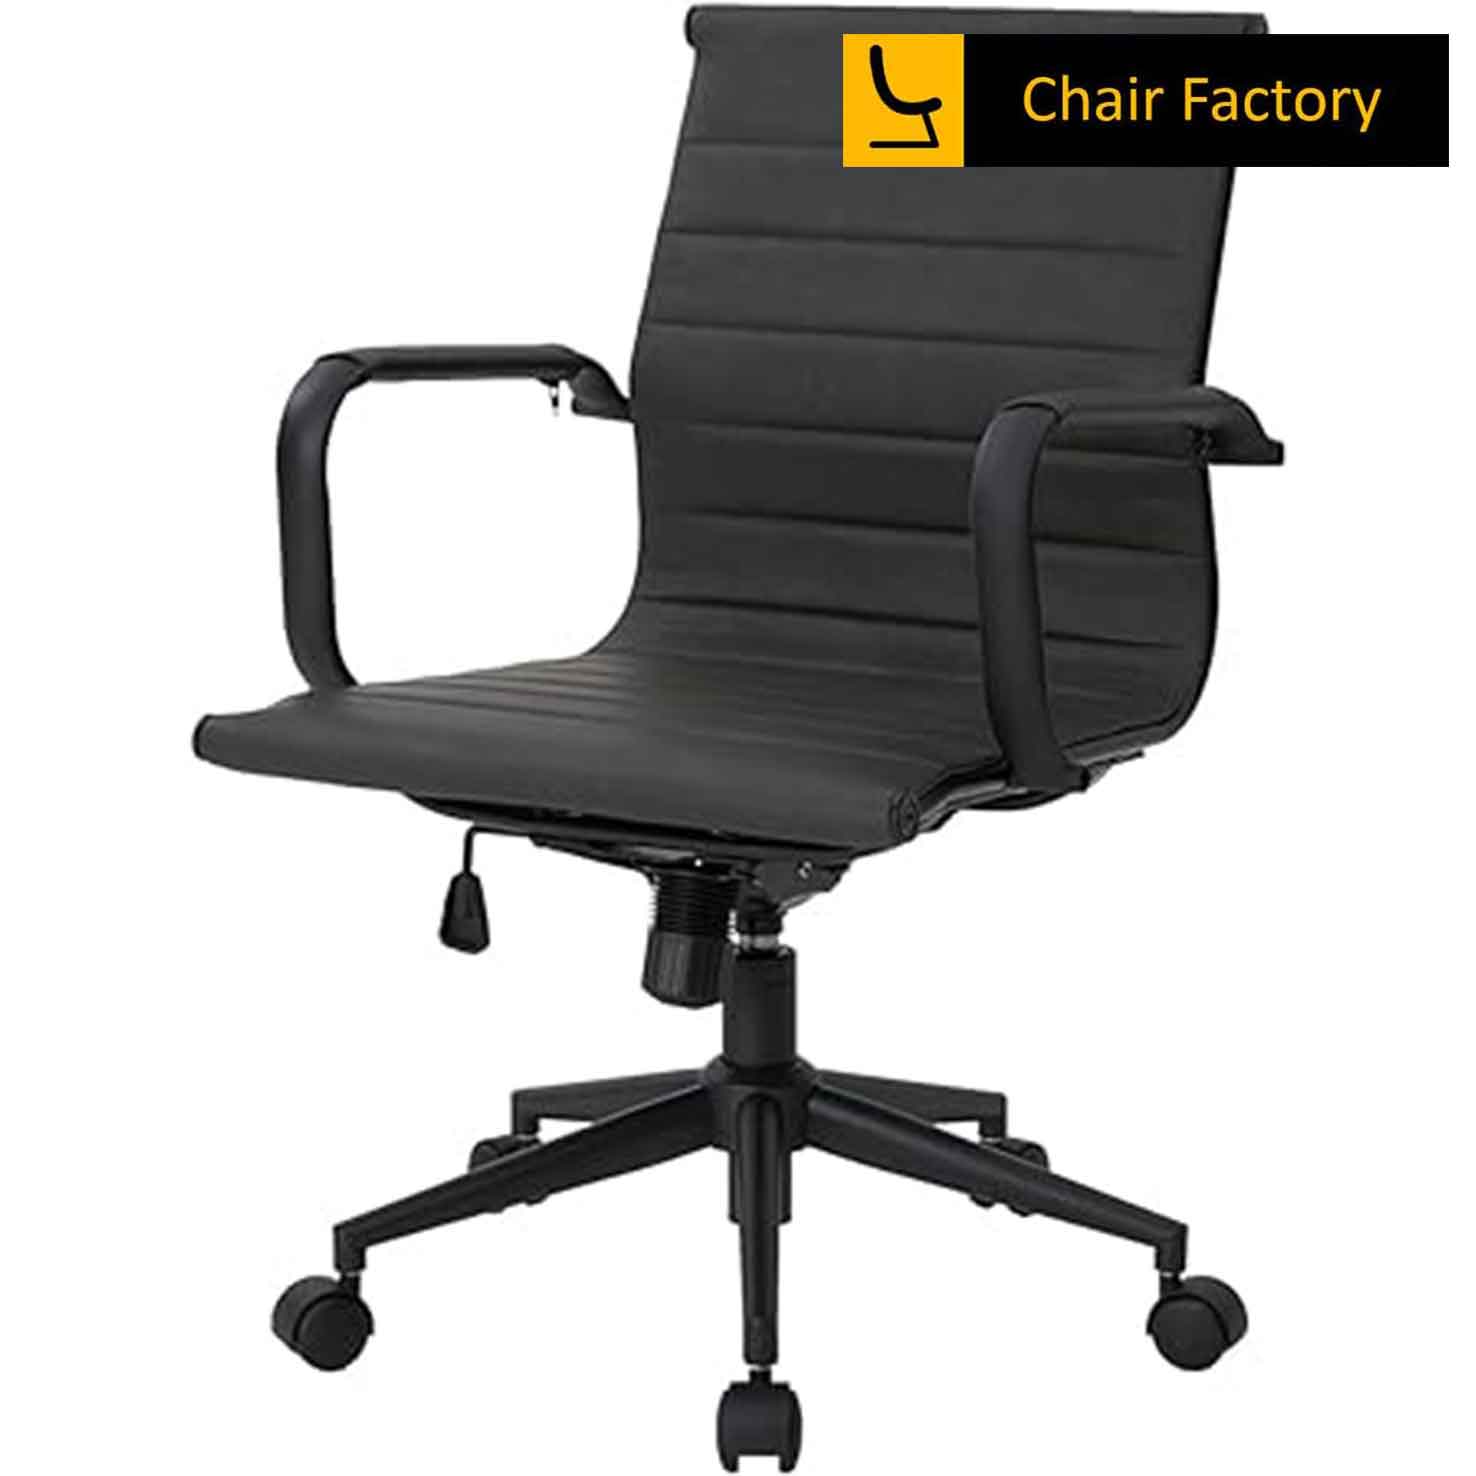 James Single Cushion mid Back conference Room Chair with black frame 